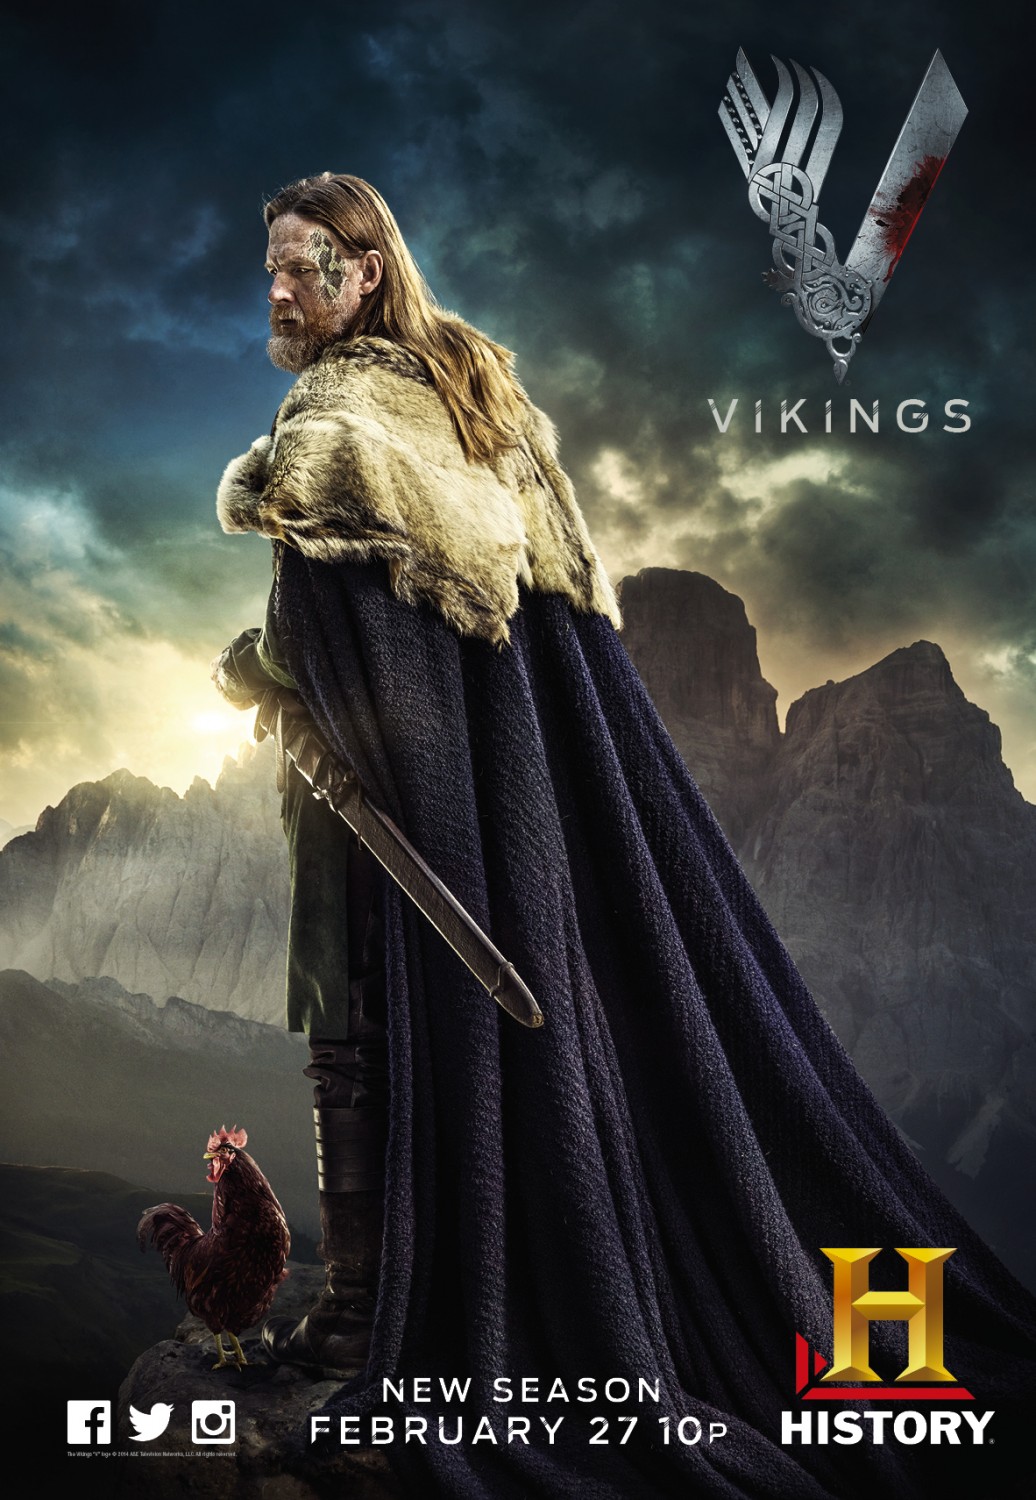 Extra Large TV Poster Image for Vikings (#10 of 30)